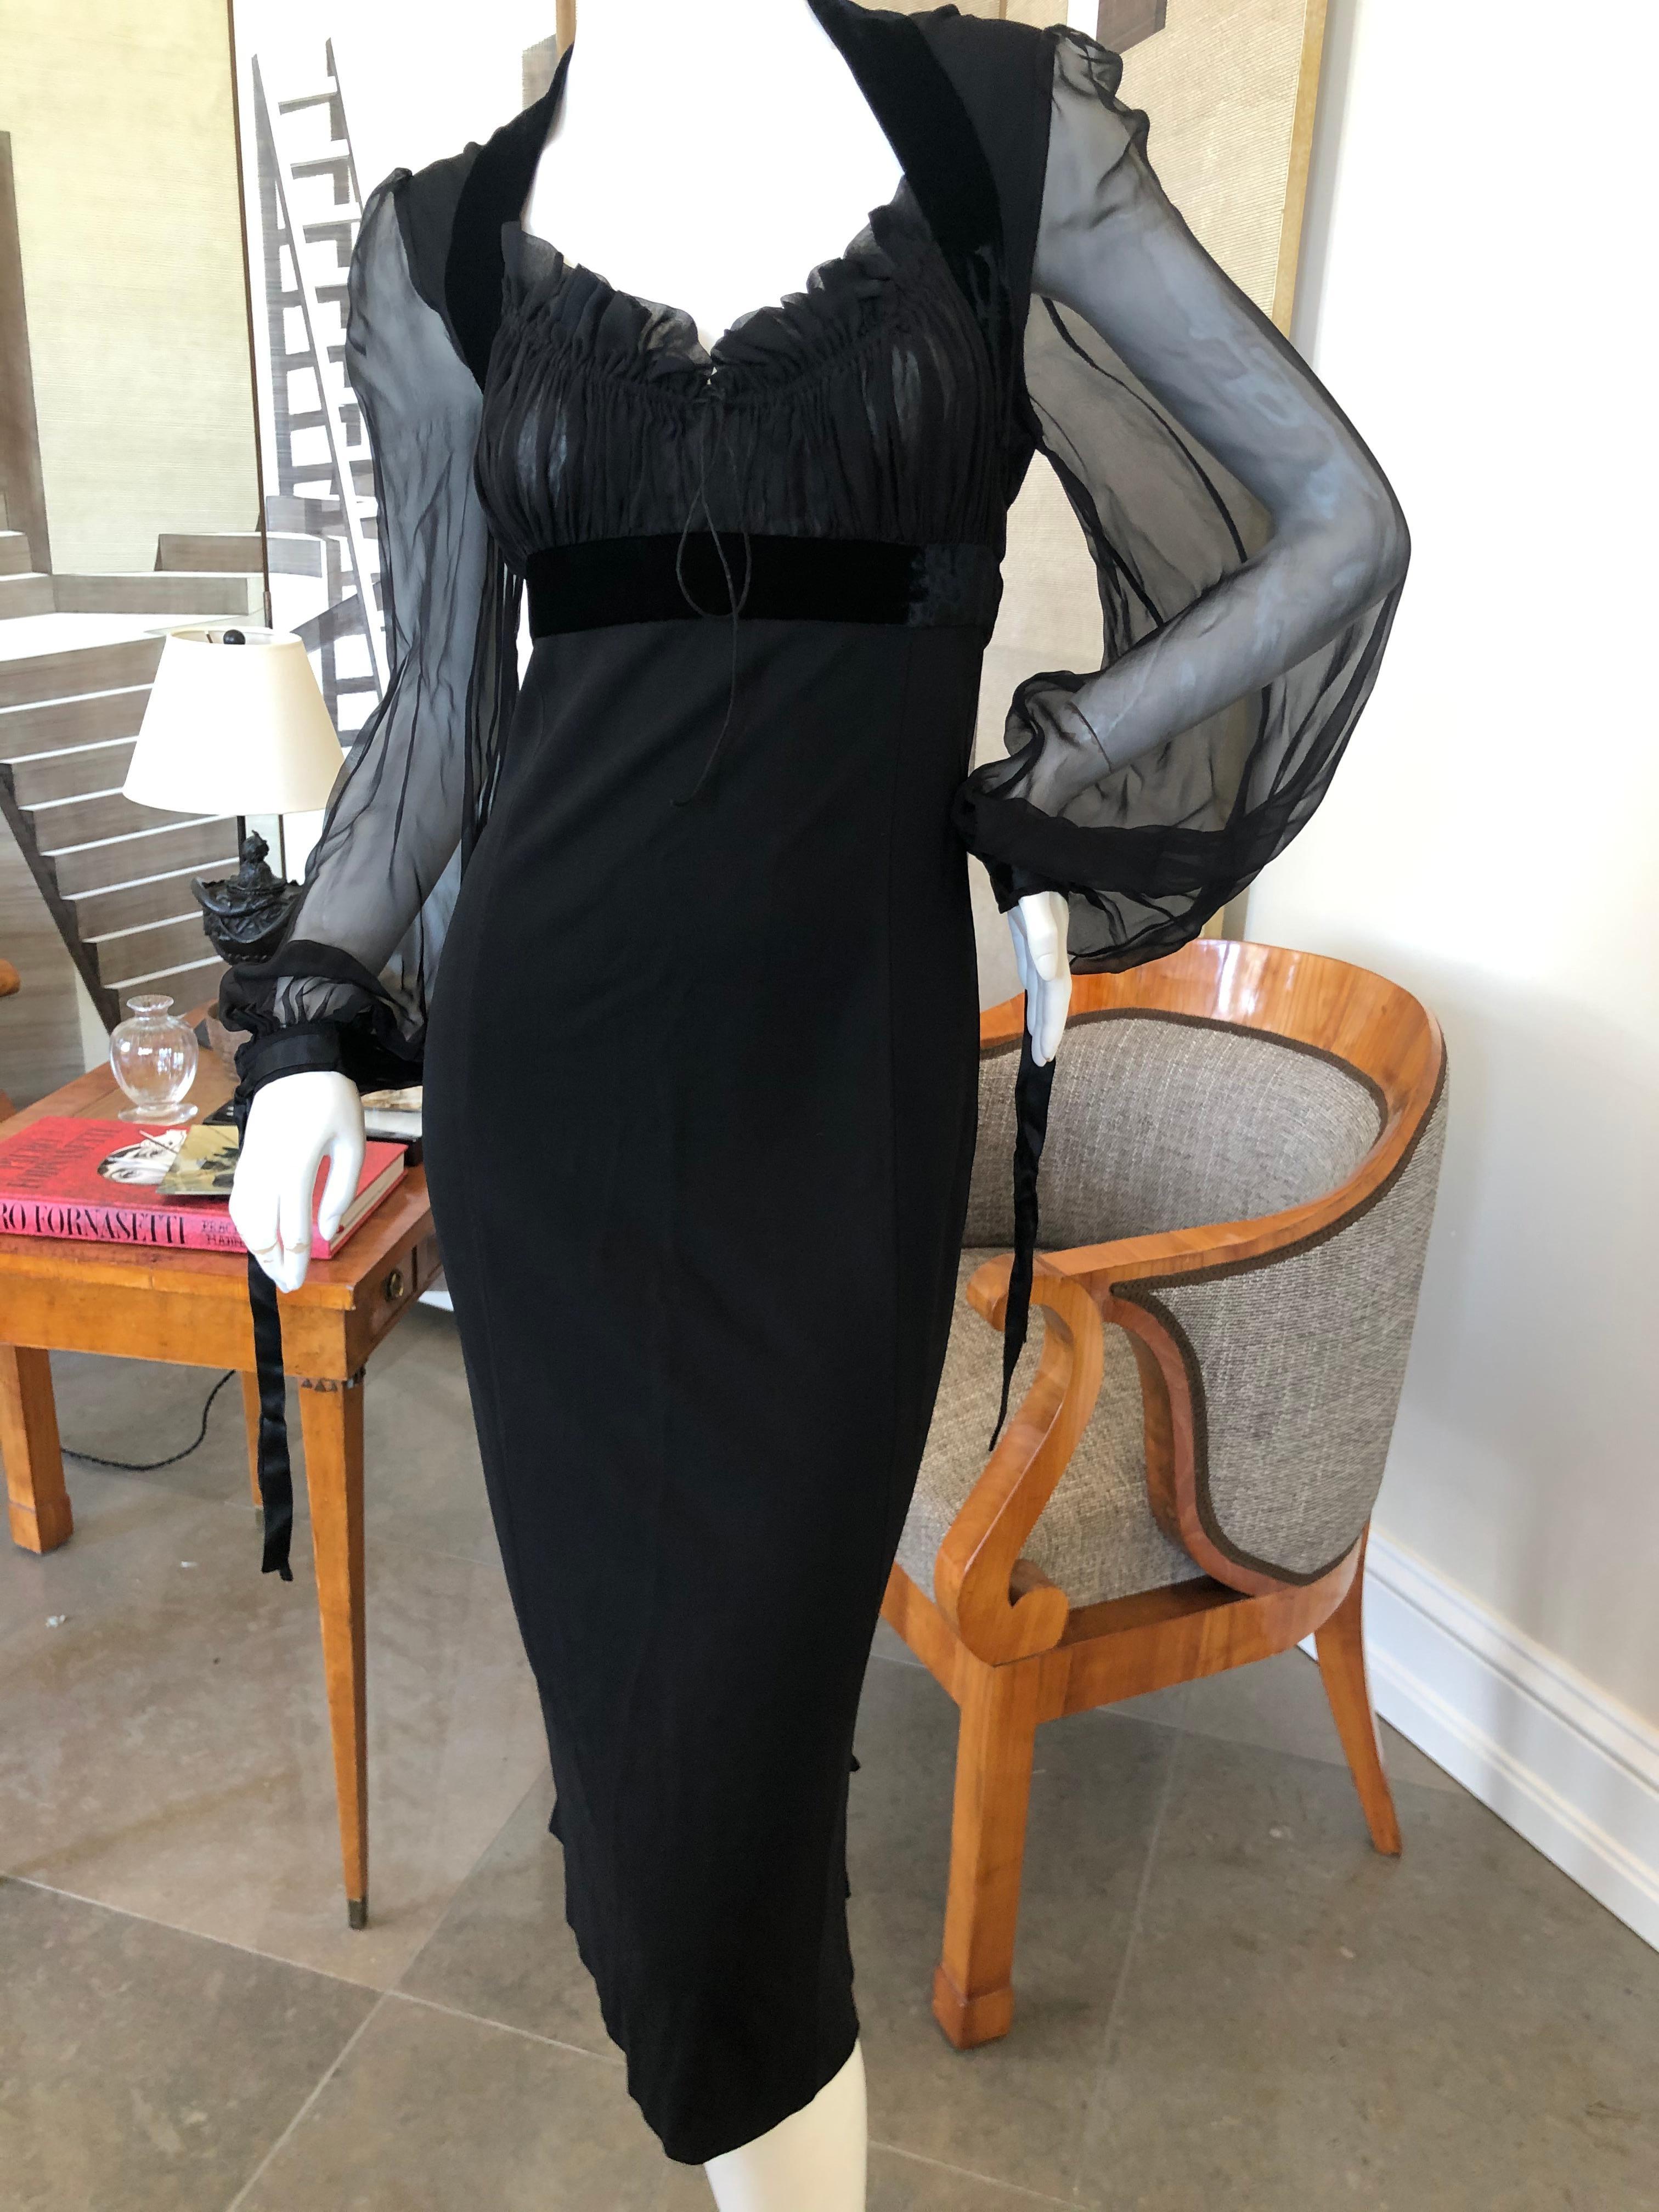 Gianfranco Ferre Vintage 80's Little Black Dress with Sheer Bishop Sleeves
Exquisite black dress from Gianfranco Ferre, who not only designed his own brilliant collections
 he also designed for Christian Dior in the years between Marc Bohan and John